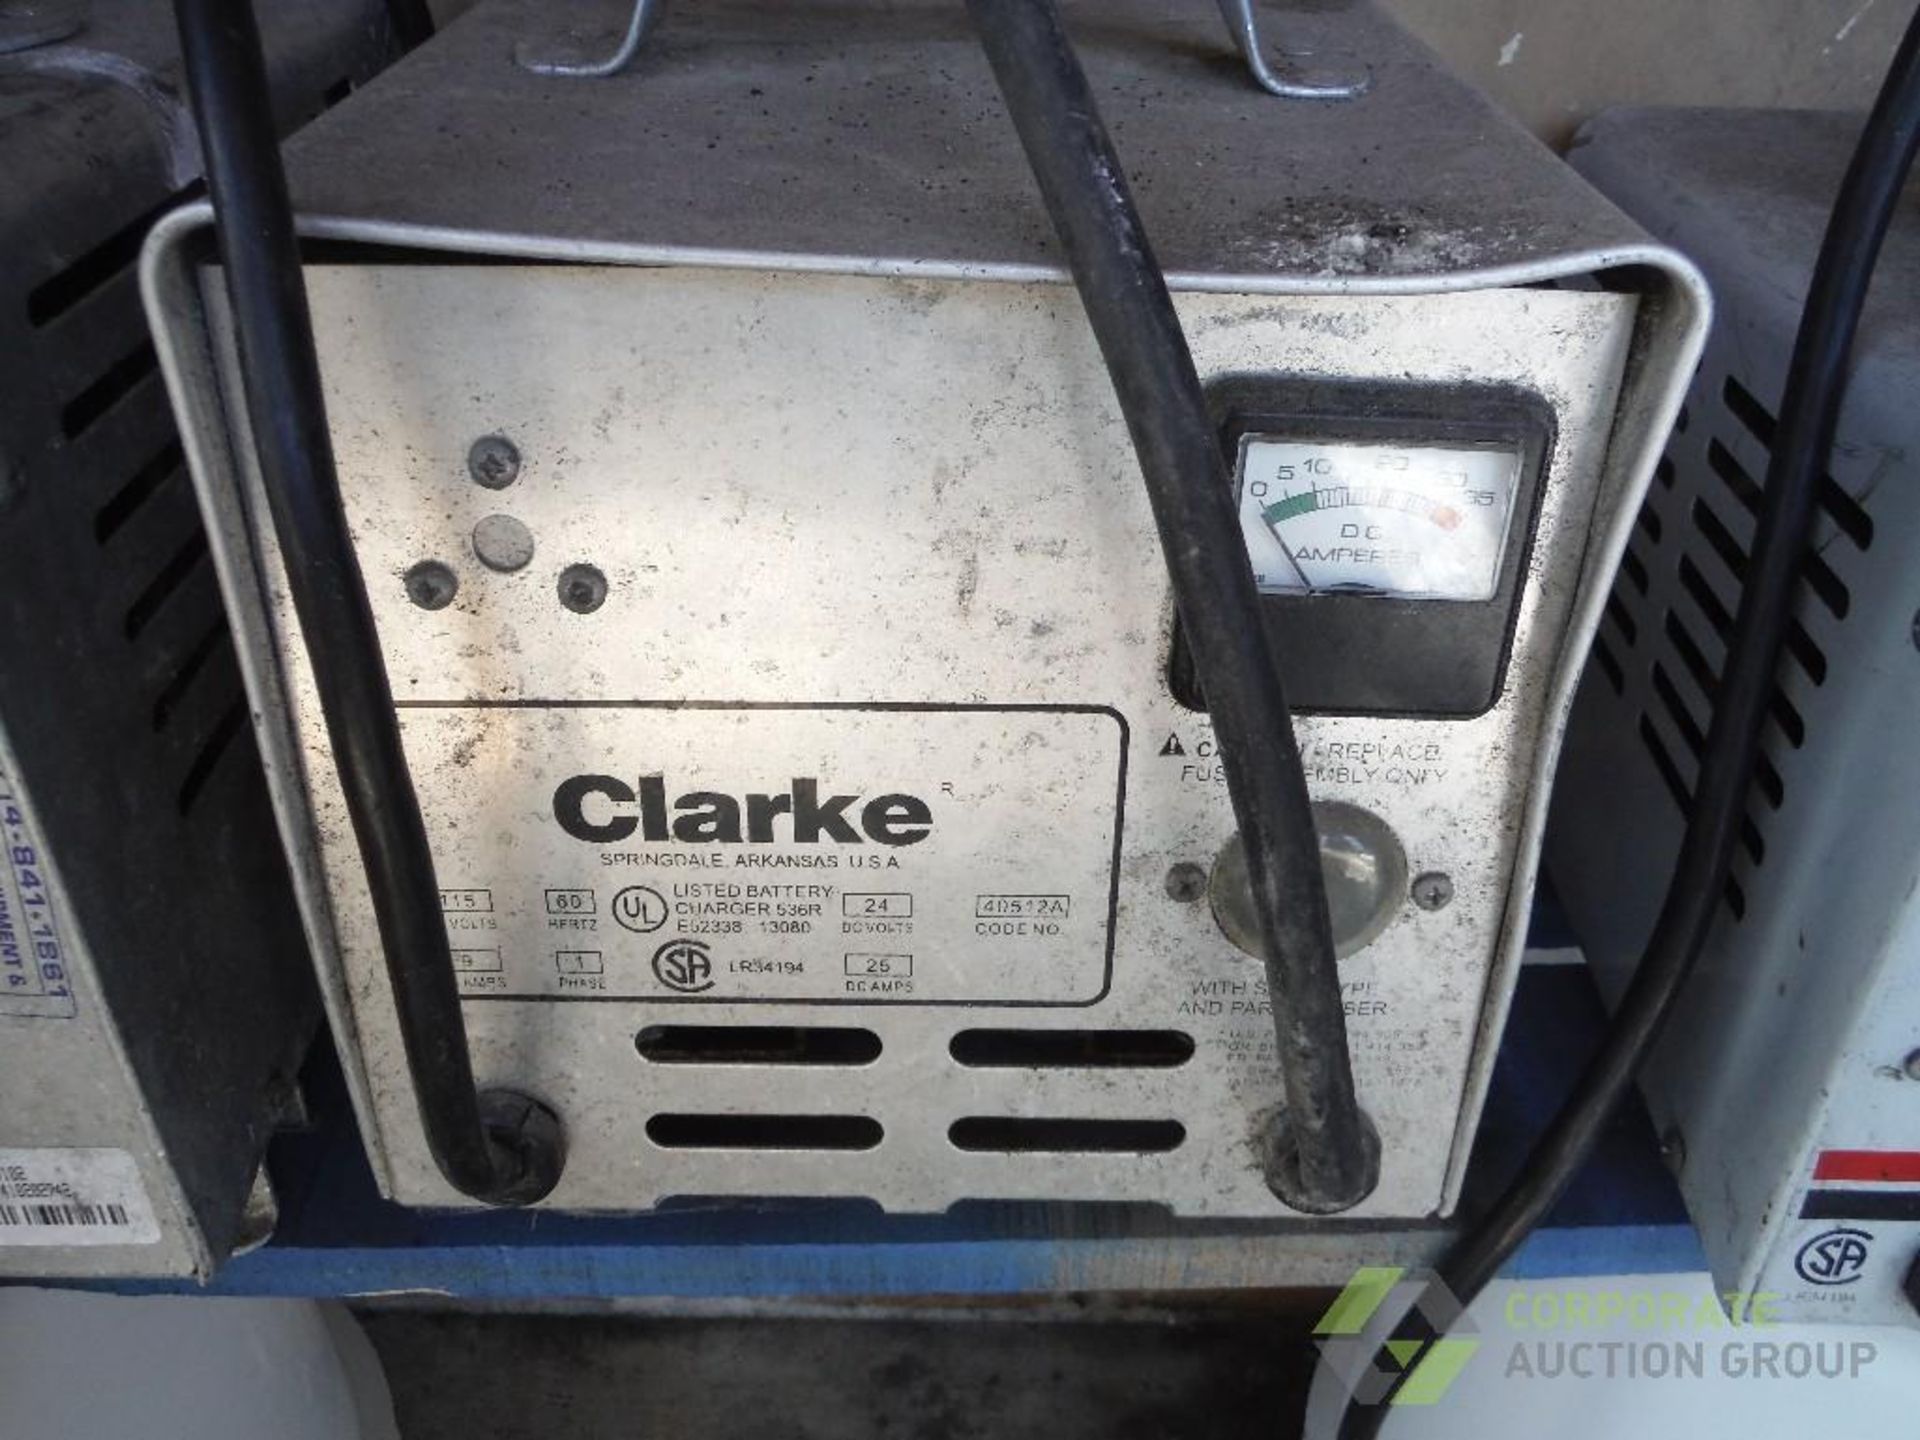 Clark 24 volt battery charger, SN 410402086 - Image 2 of 3